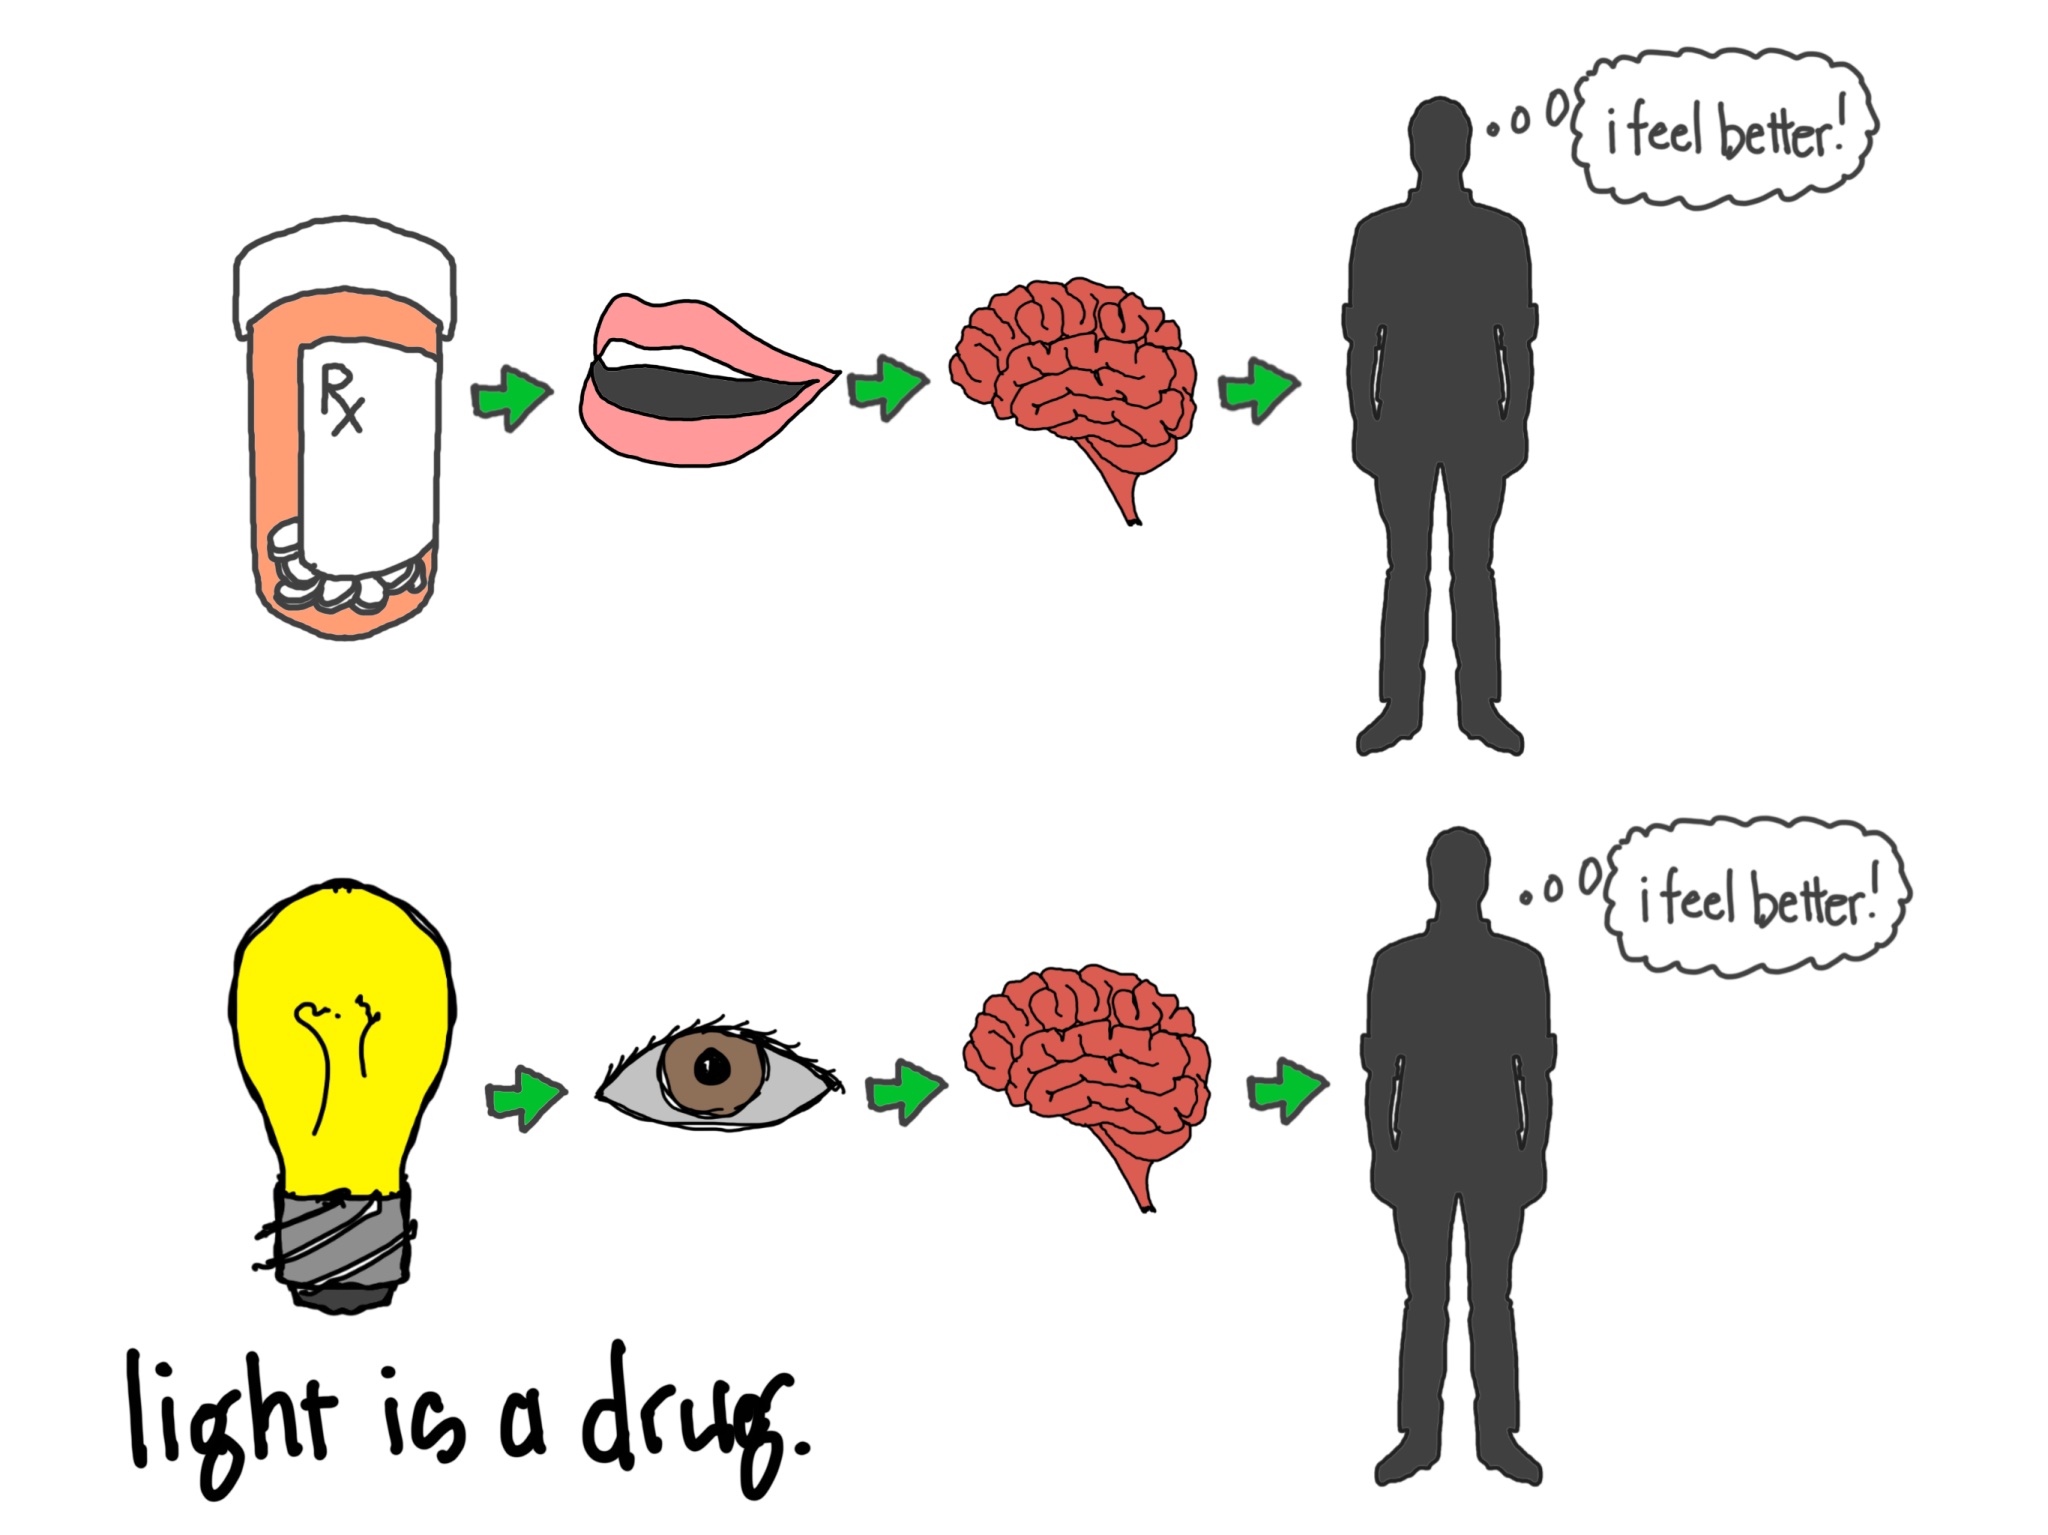 Illustrated diagram with two rows. Row one: medicine bottle green arrow to mouth green arrow to brain green arrow to silhouette figure thinking "I feel better!" Row two: light bulb green arrow to eye green arrow to brain green arrow to silhouette figure thinking "I feel better." Script at the bottom of the graphic states "light is a drug."